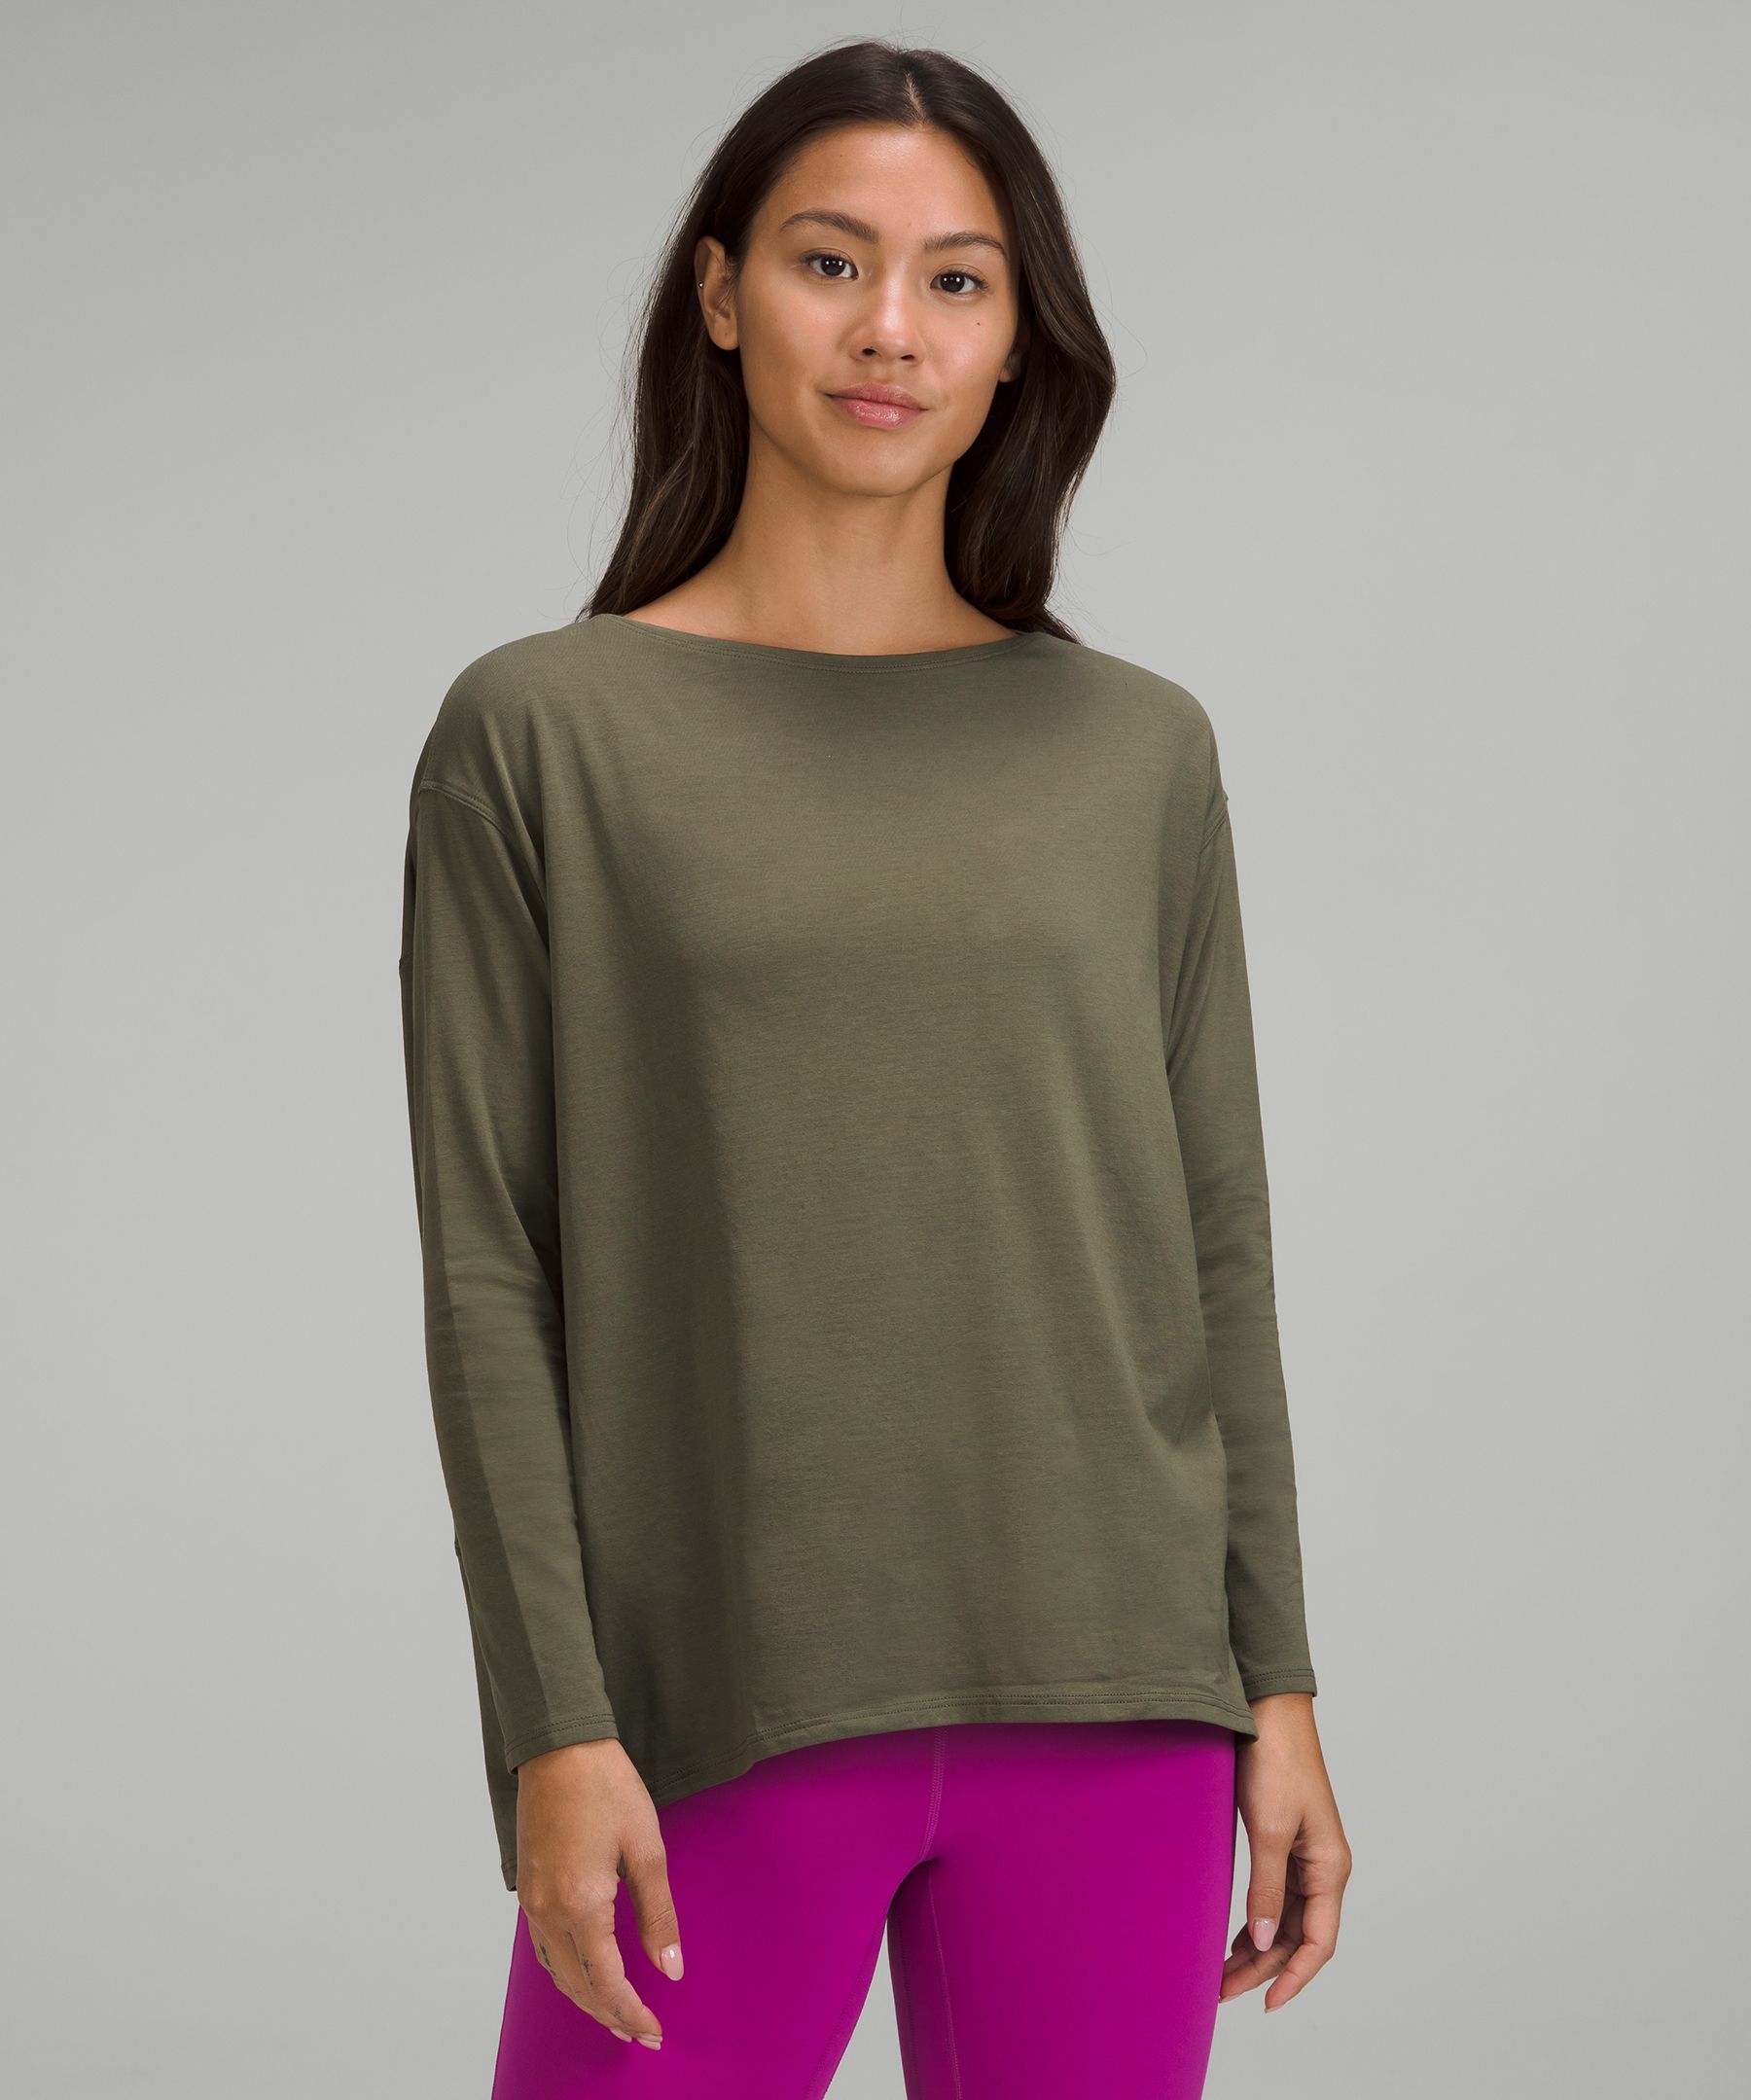 Lululemon Back In Action Long Sleeve Shirt In Carob Brown